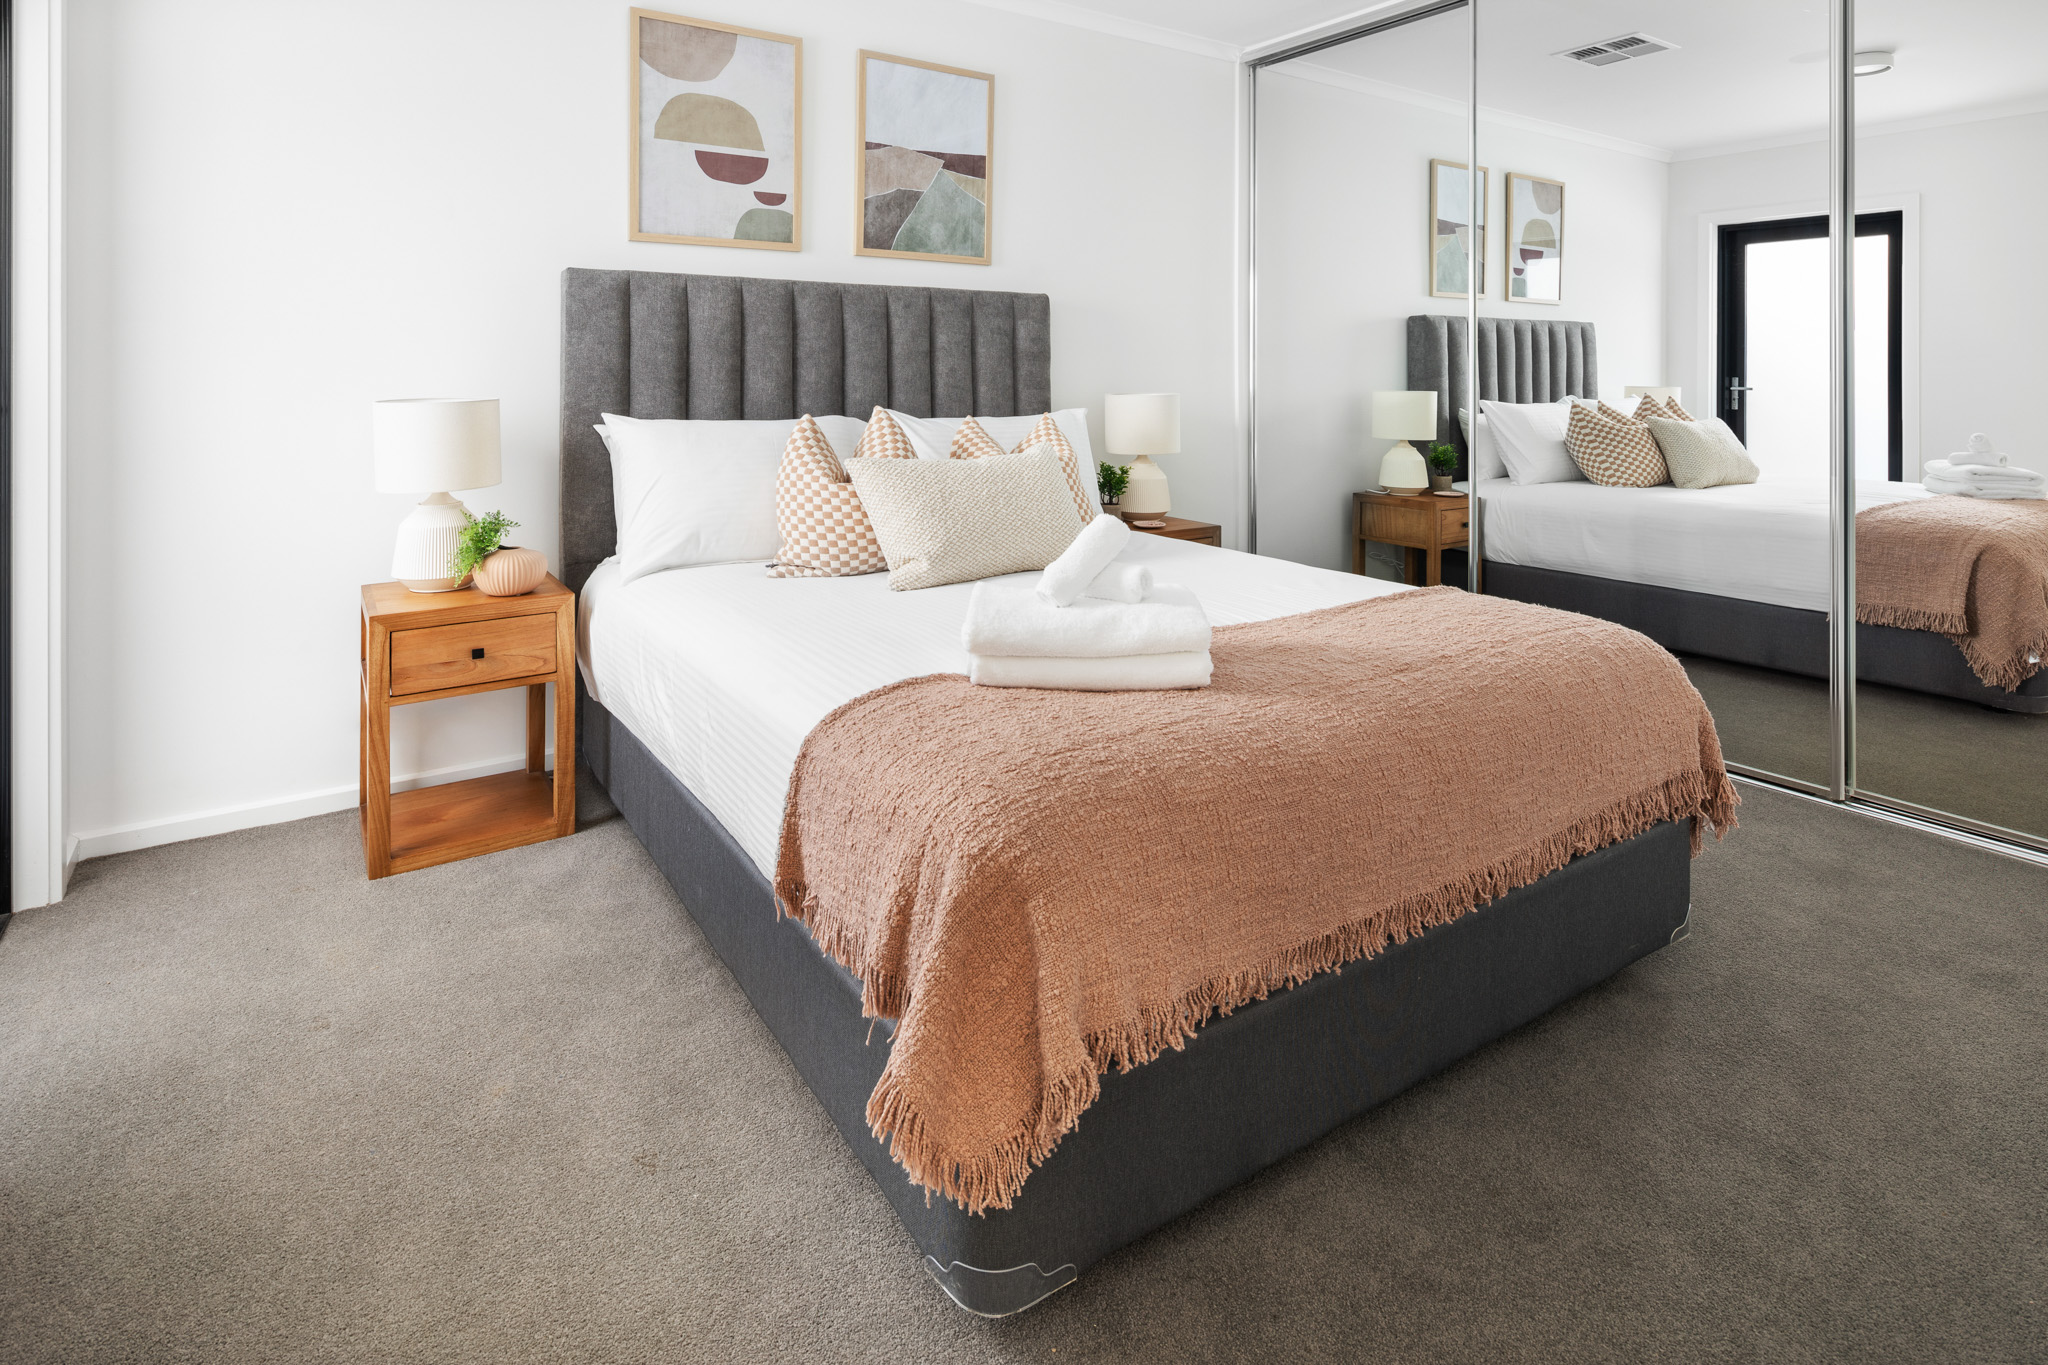 Bedroom - Two Bedroom Apartment - Urban Rest - Clare Street Apartments - Port Adelaide